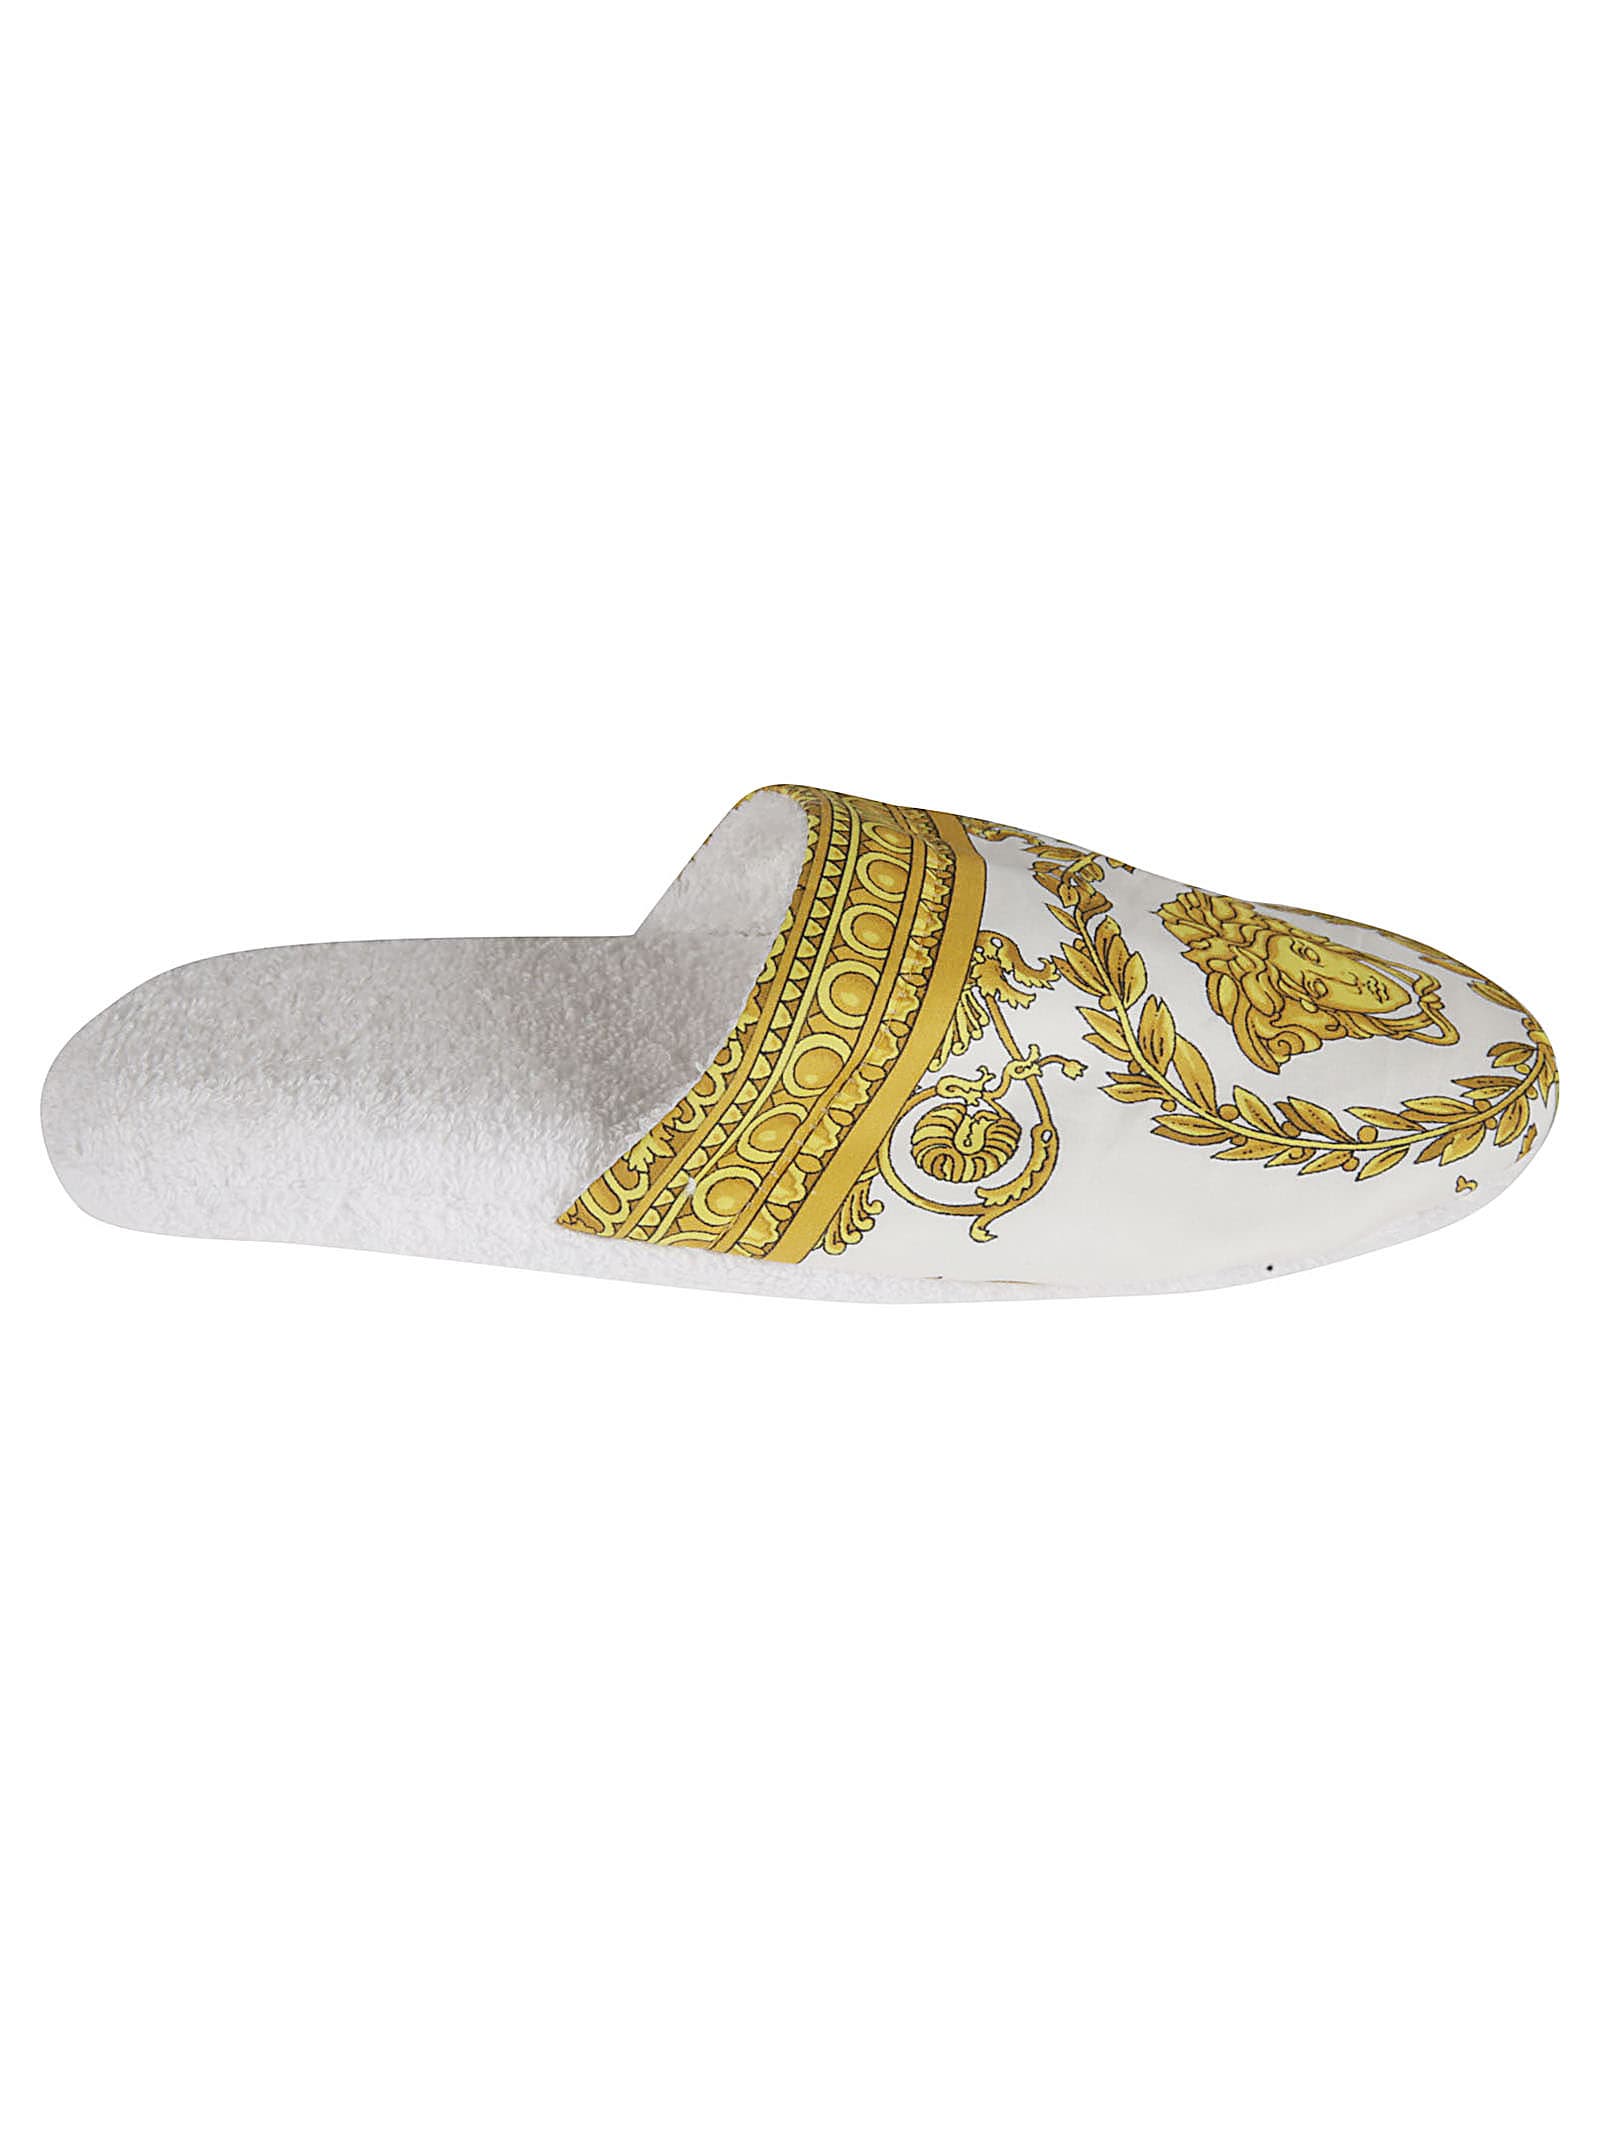 Buy Versace Medusa Head Printed Slippers online, shop Versace shoes with free shipping